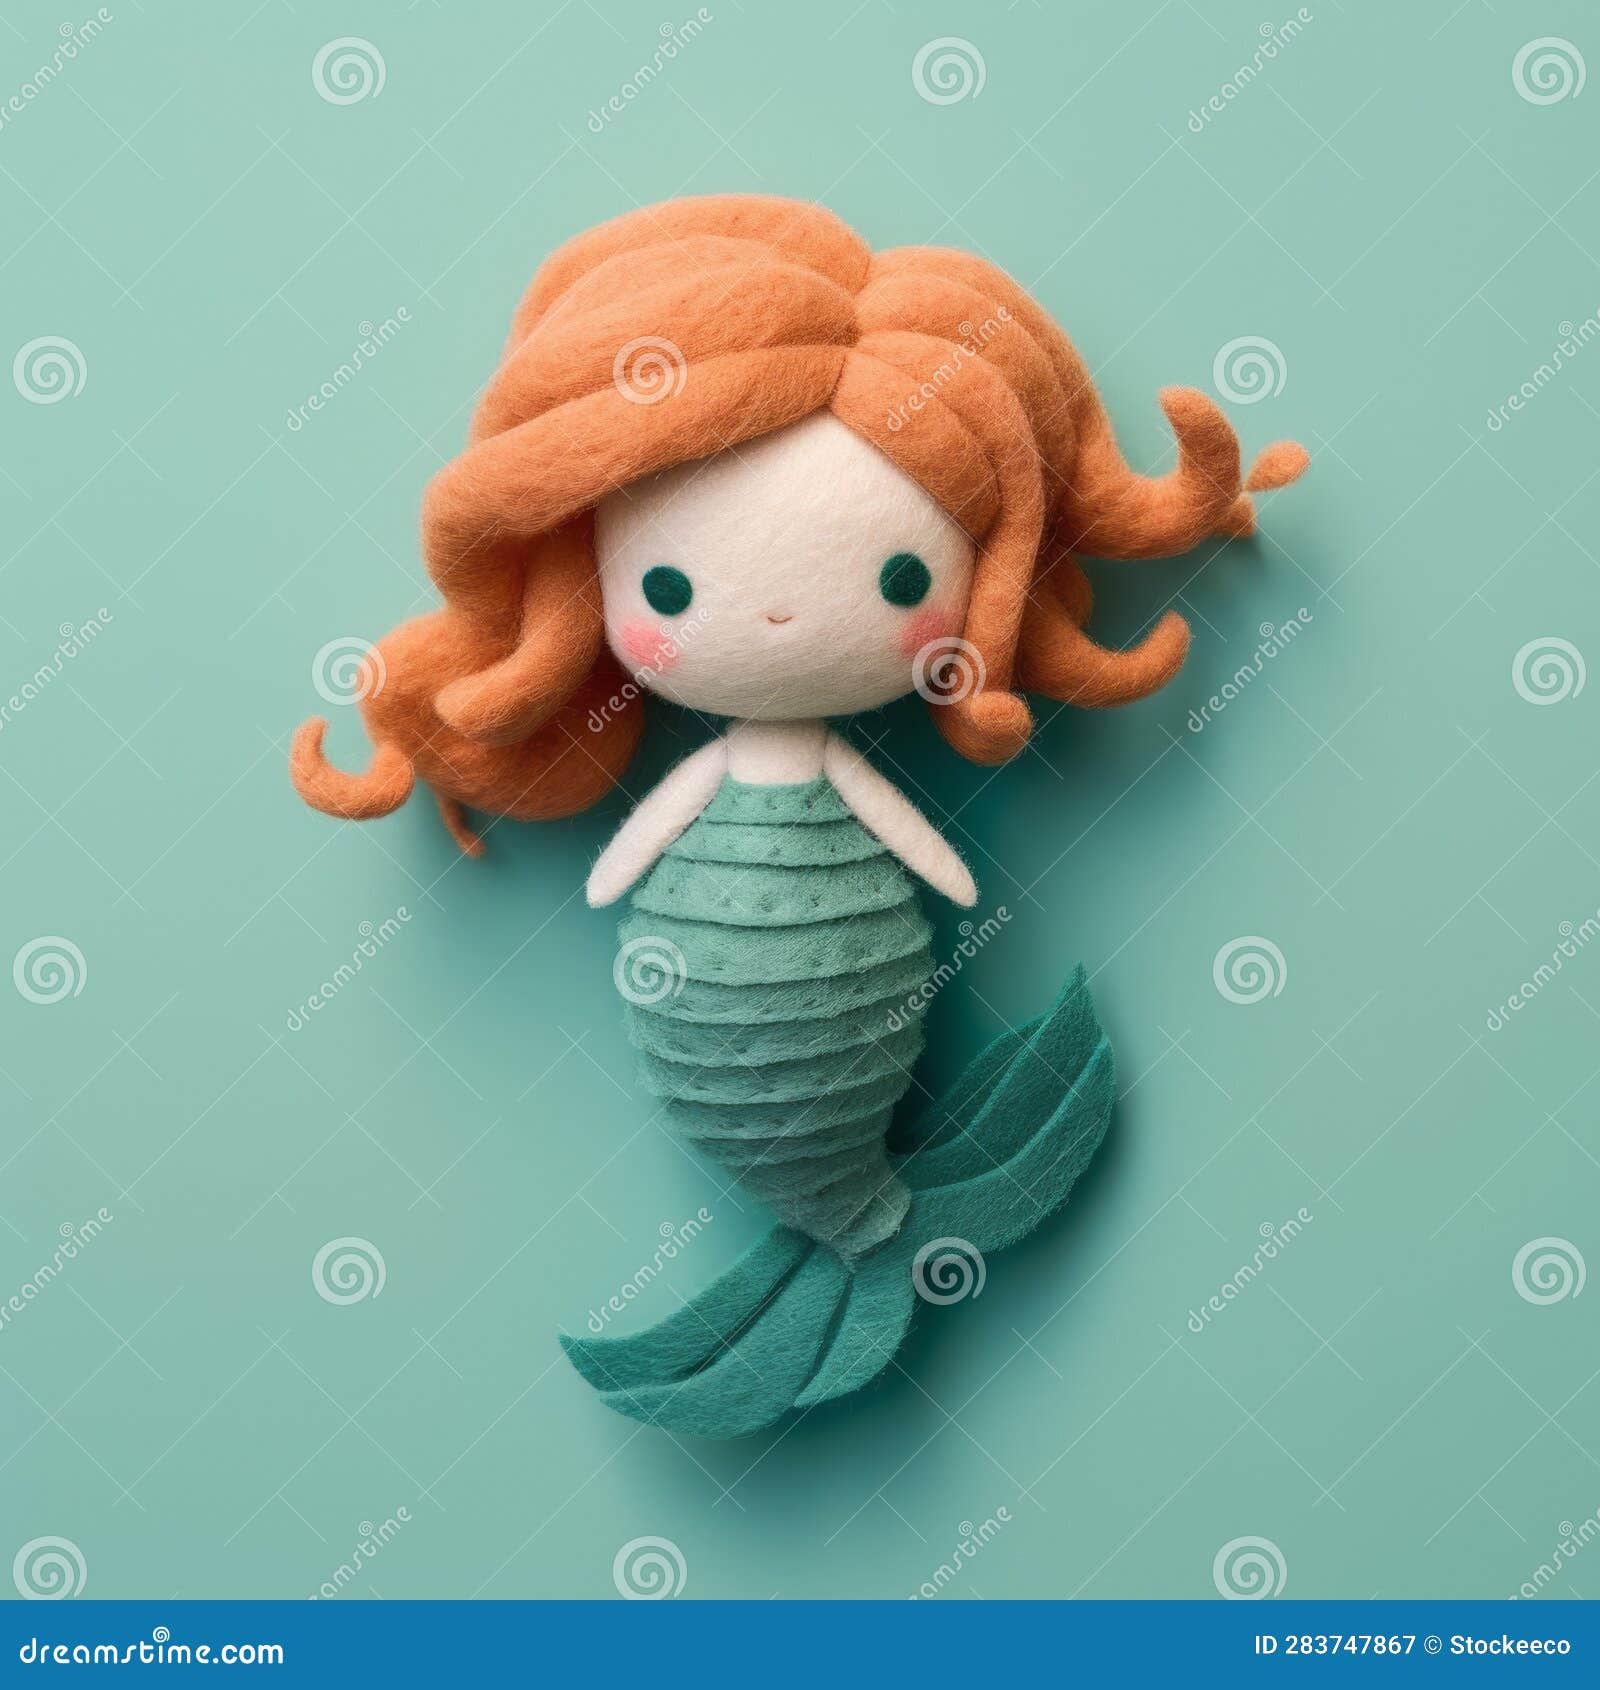 Super Cute Felt Mermaid with Curly Red Hair and Green Tail Stock